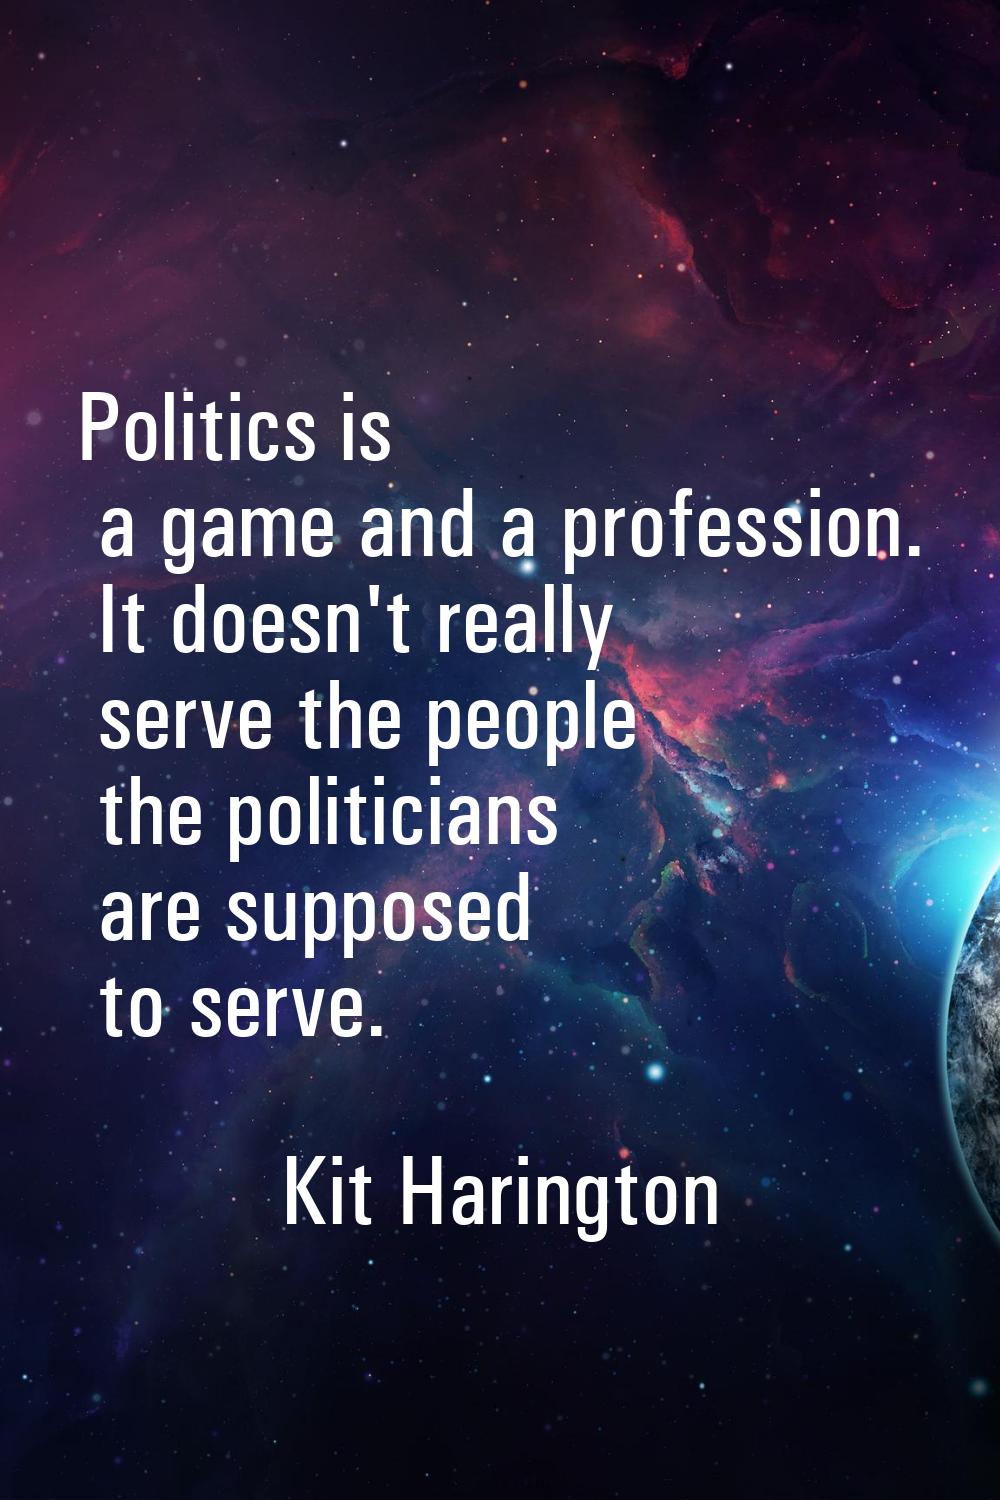 Politics is a game and a profession. It doesn't really serve the people the politicians are suppose